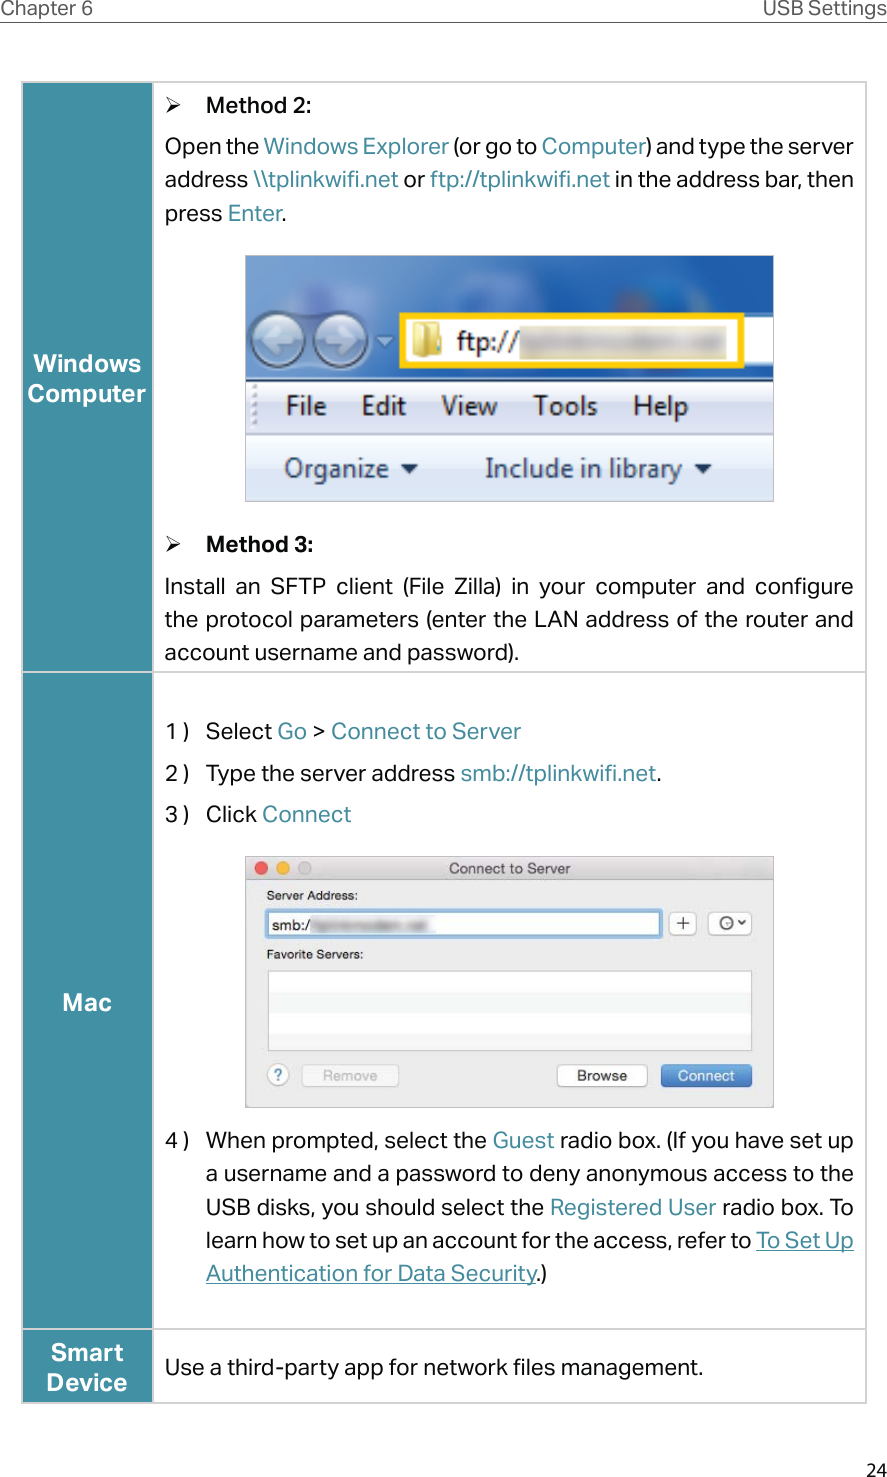 24Chapter 6 USB SettingsWindows Computer ¾Method 2:Open the Windows Explorer (or go to Computer) and type the server address \\tplinkwifi.net or ftp://tplinkwifi.net in the address bar, then press Enter. ¾Method 3:Install an SFTP client (File Zilla) in your computer and configure the protocol parameters (enter the LAN address of the router and account username and password).Mac1 )  Select Go &gt; Connect to Server2 )  Type the server address smb://tplinkwifi.net. 3 )  Click Connect4 )  When prompted, select the Guest radio box. (If you have set up a username and a password to deny anonymous access to the USB disks, you should select the Registered User radio box. To learn how to set up an account for the access, refer to To Set Up Authentication for Data Security.)Smart Device Use a third-party app for network files management.